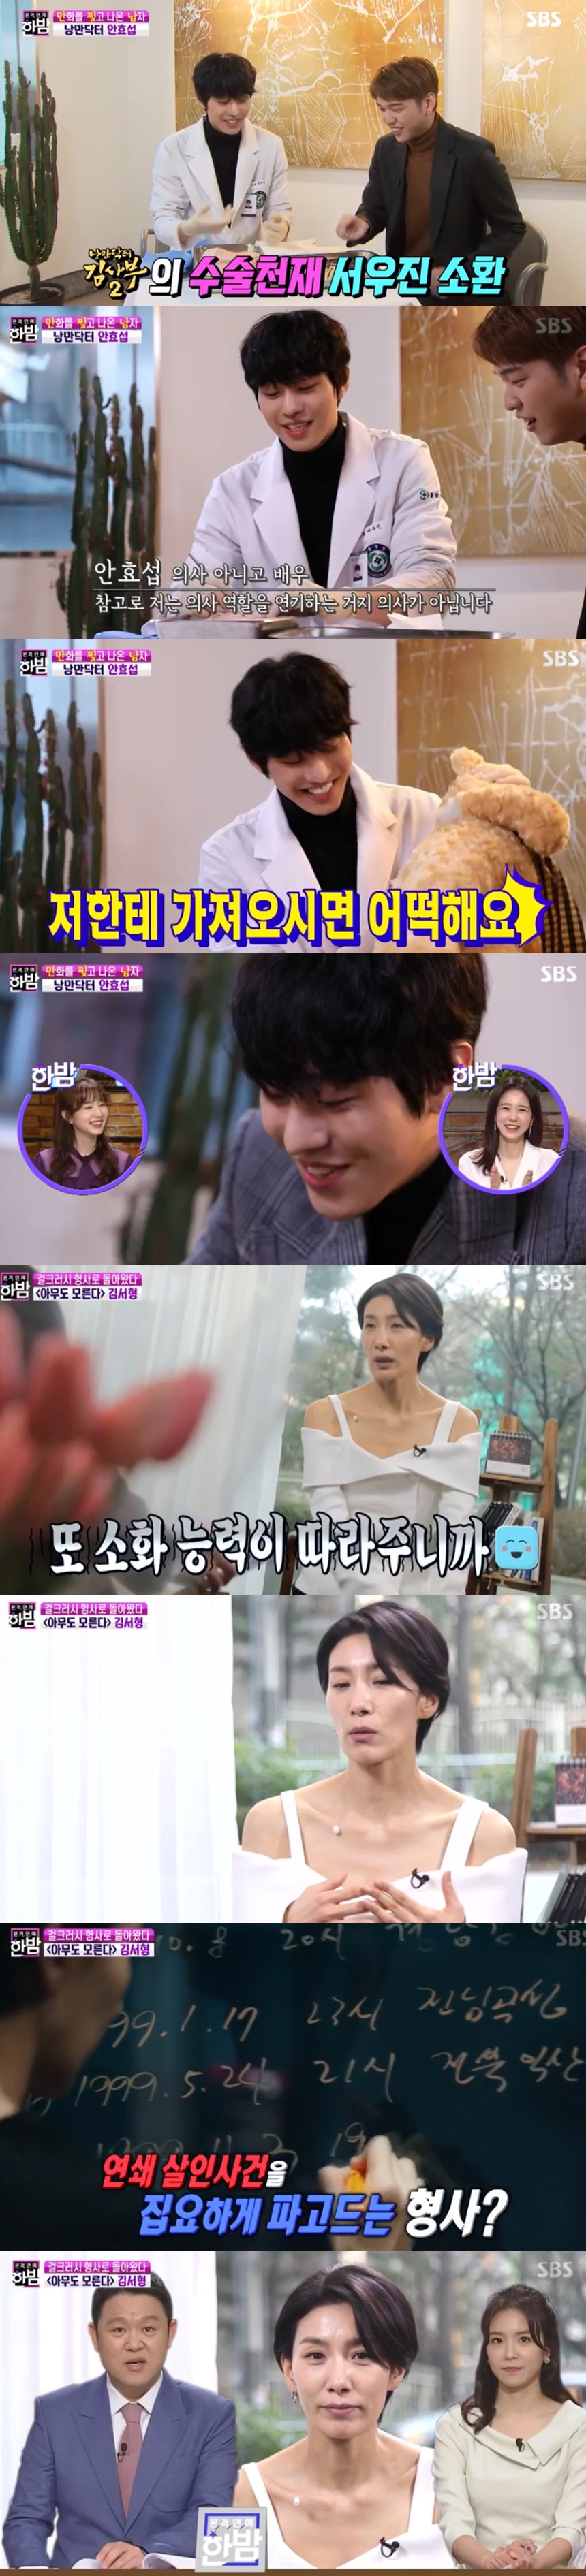 In the Midnight, Ahn Hyo-seop revealed the kissing scene behind Lee Sung-kyung.In the SBS entertainment program The Full Entertainment Midnight, which aired on the 4th, an interview by Ahn Hyo-seop, who played Seo Woo-jin of the romantic doctor Kim Sabu, was released.An interview with actor Ahn Hyo-seop, who completely played the role of Seo Woo-jin in the romantic doctor Kim Sabu, was also drawn.When asked if he was a real lover with his extraordinary chemistry with his partner Lee Sung-kyung, Ahn Hyo-seop said, I had a kissing god but I was so nervous.So I ate a bottle of wine and took a god. Ahn Hyo-seop said that a great effort followed to be able to fully digest the role of a doctor.In order to play the role of NTU Hospital Metro Station doctor, Kim Sabu team was surprised to know that he had visited the NTU Hospital Metro station directly.Ahn Hyo-seop was especially known to have practiced on the usual filming site.Kim Seo-hyung, who plays Detective in No One, said, I am trying to wear fashion for the role this time. I tried to wear simple but sophisticated clothes because it is a detective role.He then laughed, saying, I am so good at digestion.Kim Seo-hyung said, I do not think I should say anything about this ending, he said. There will be a reversal somewhere.Kim Seo-hyung promised to play MC in the night on the 15% pledge of audience rating.It was discussed about the donation procession of the entertainment industry to overcome the Corona 19 virus damage.Kim Bo-sung, who supported 12,000 masks to Deagu from Park Hae-jin, who supported video production expenses for Corona prevention measures, continued.In particular, it was known that the citizens who received the mask delivered by Kim Bo-sung were tearful.Kim Bo-sung told the midnight production team that he wanted to go and give a mask because he knew that Deagu citizens were really hard.This time, I was allowed to kneel, and once I am alone, I hope that the citizens of Deagu will overcome it with righteousness. Eun Hyuk, who made a donation of 100 million won, said, My mother was sick, but I donated to Coronaro in the hope that there would not be sick people like my mother. I hope that those who have been struggling with this virus and those who are working hard will be able to work hard.A reverse movie that emerged as Corona 19 was introduced, and it was called Corona reality because it noted bats as the source of the virus.The films content director said, They all thought it was a predictable problem.I think it was realistic to express the infection easily with hands and faces, the specialist said. There is no virus without a latency period.In that sense, the virus has progressed too quickly. All disasters and adversity must be overcome together, of course, thats not easy, said Kim Sung-soo, director of the movie Cold.Critics explained that when people look at the process of overcoming people like two movies that have a happy ending, people tell them that they overcome and overcome this process.Chang Woo Young, who was released on the 28th of last month, said, Corona 19 has left the whole area right away from the last vacation.I was really sorry, he said. I thank the motives and seniors who have been good at it for this.Chang Woo Young, who showed his gratitude to Twice and ITZY during his military career, attracted attention by saying, I was able to hold on really well.In particular, Chang Woo Young said, I feel really whole, attracting attention by dancing the dance properly.Especially, I showed a smile by showing my own dance with my mother.Chang Woo Young said, I am so grateful for the joy of the whole world. I will be a vitamin that gives you a smile now.I didnt know that Bong Joon-ho would mention us, said Yoon Se-yoon, who also dealt with the parody of Yoo Se-yoon and Moon Se-yoon, who parodied the recent topic of Sharon Choi and Bong.I am so grateful, he said.The parody was followed by a series of parody, from advertising to posters, and the parody was reported to have increased sales by 5 to 10 percent.The air forces Le Mighterable, which parodied the movie Les Miserables, was also mentioned by Russell Crowe and collected topics.The movie The Animals Who Want to Hold the Jeep was also noted as a parody of Hong Hyun-hee and Jay-Won before the release.Hong Hyun-hee and Jay-Won received the attention of netizens as a god who showed affection for chicken under the title of Animals Wanting to Eat Even a Jeep.